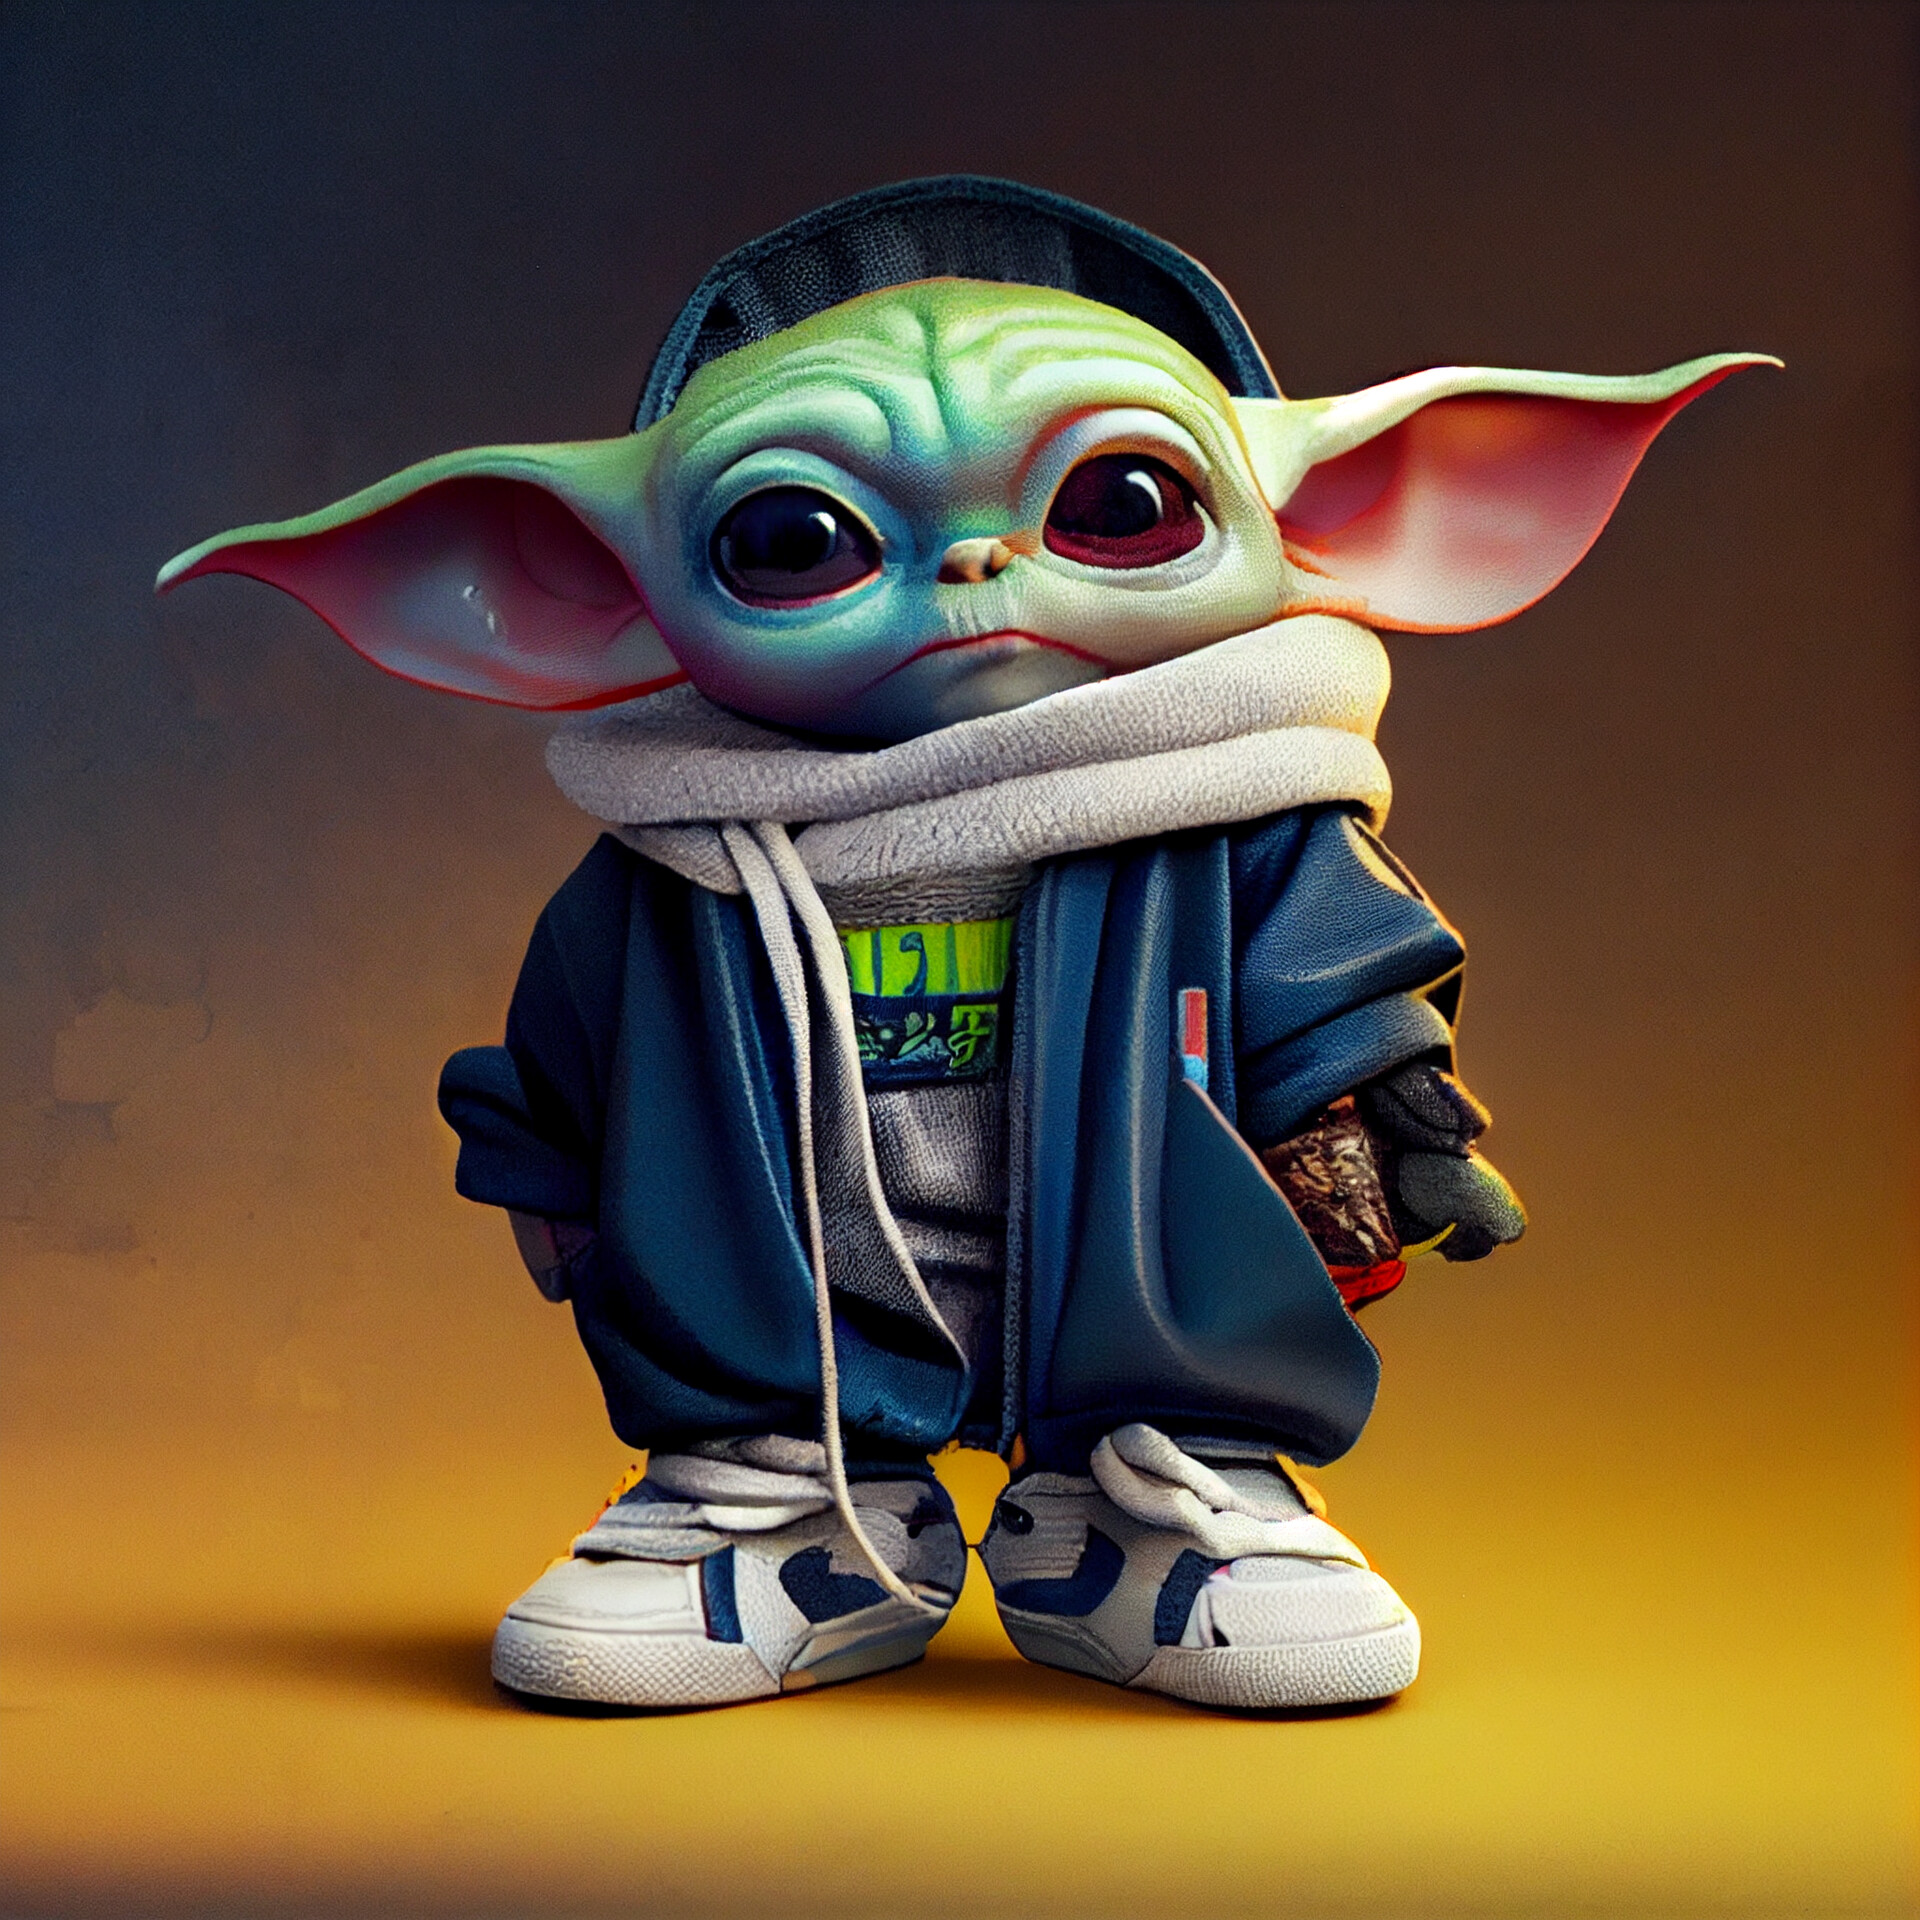 Cute and Adorable Baby Yoda Portrait 